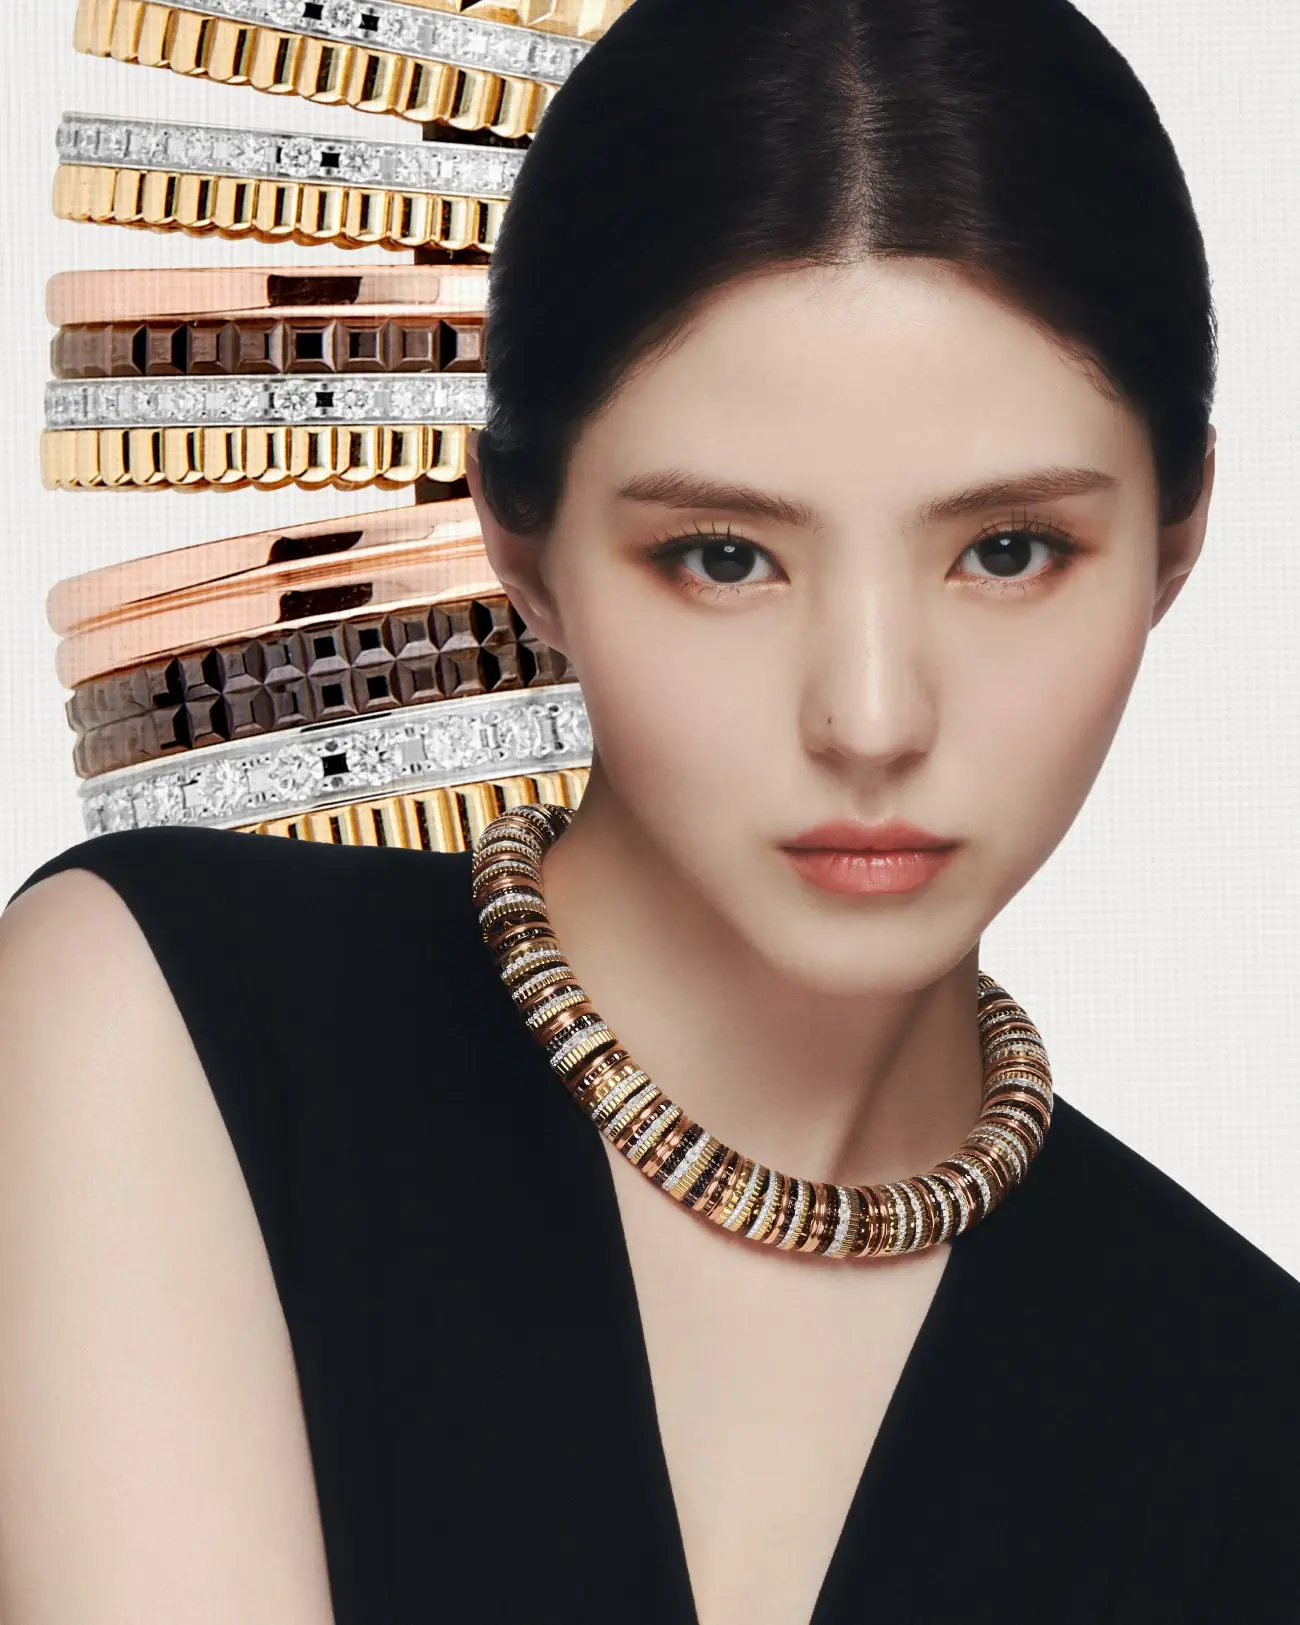 Boucheron marks 20 years of the iconic Quatre collection with a dazzling new campaign